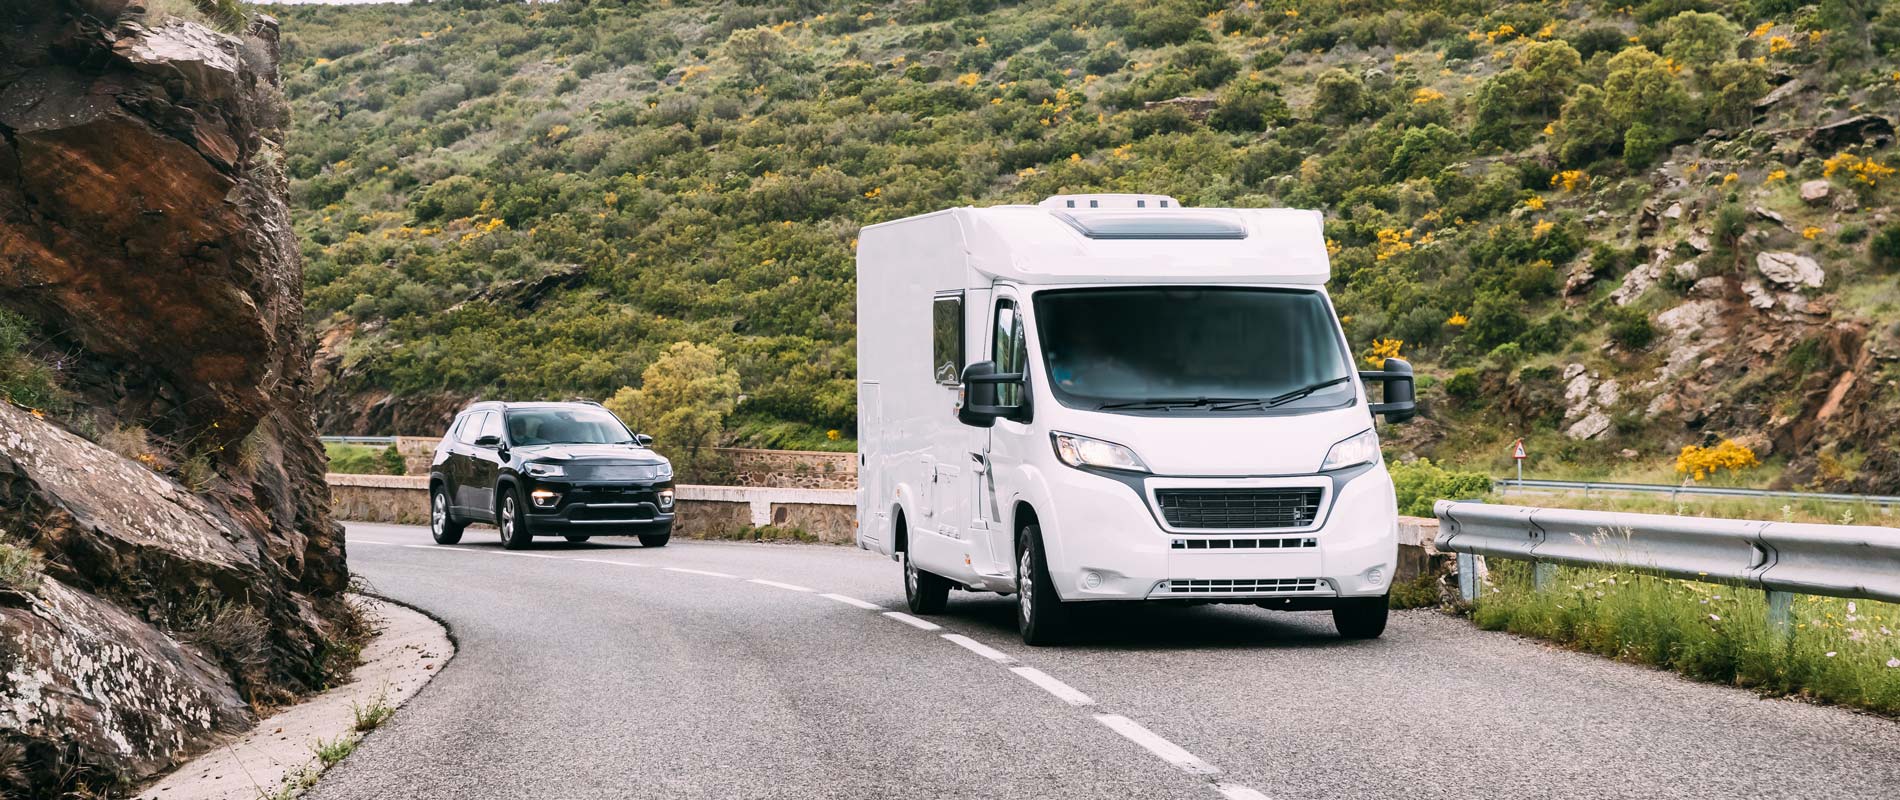 Hired motorhome driving on main road in country valley